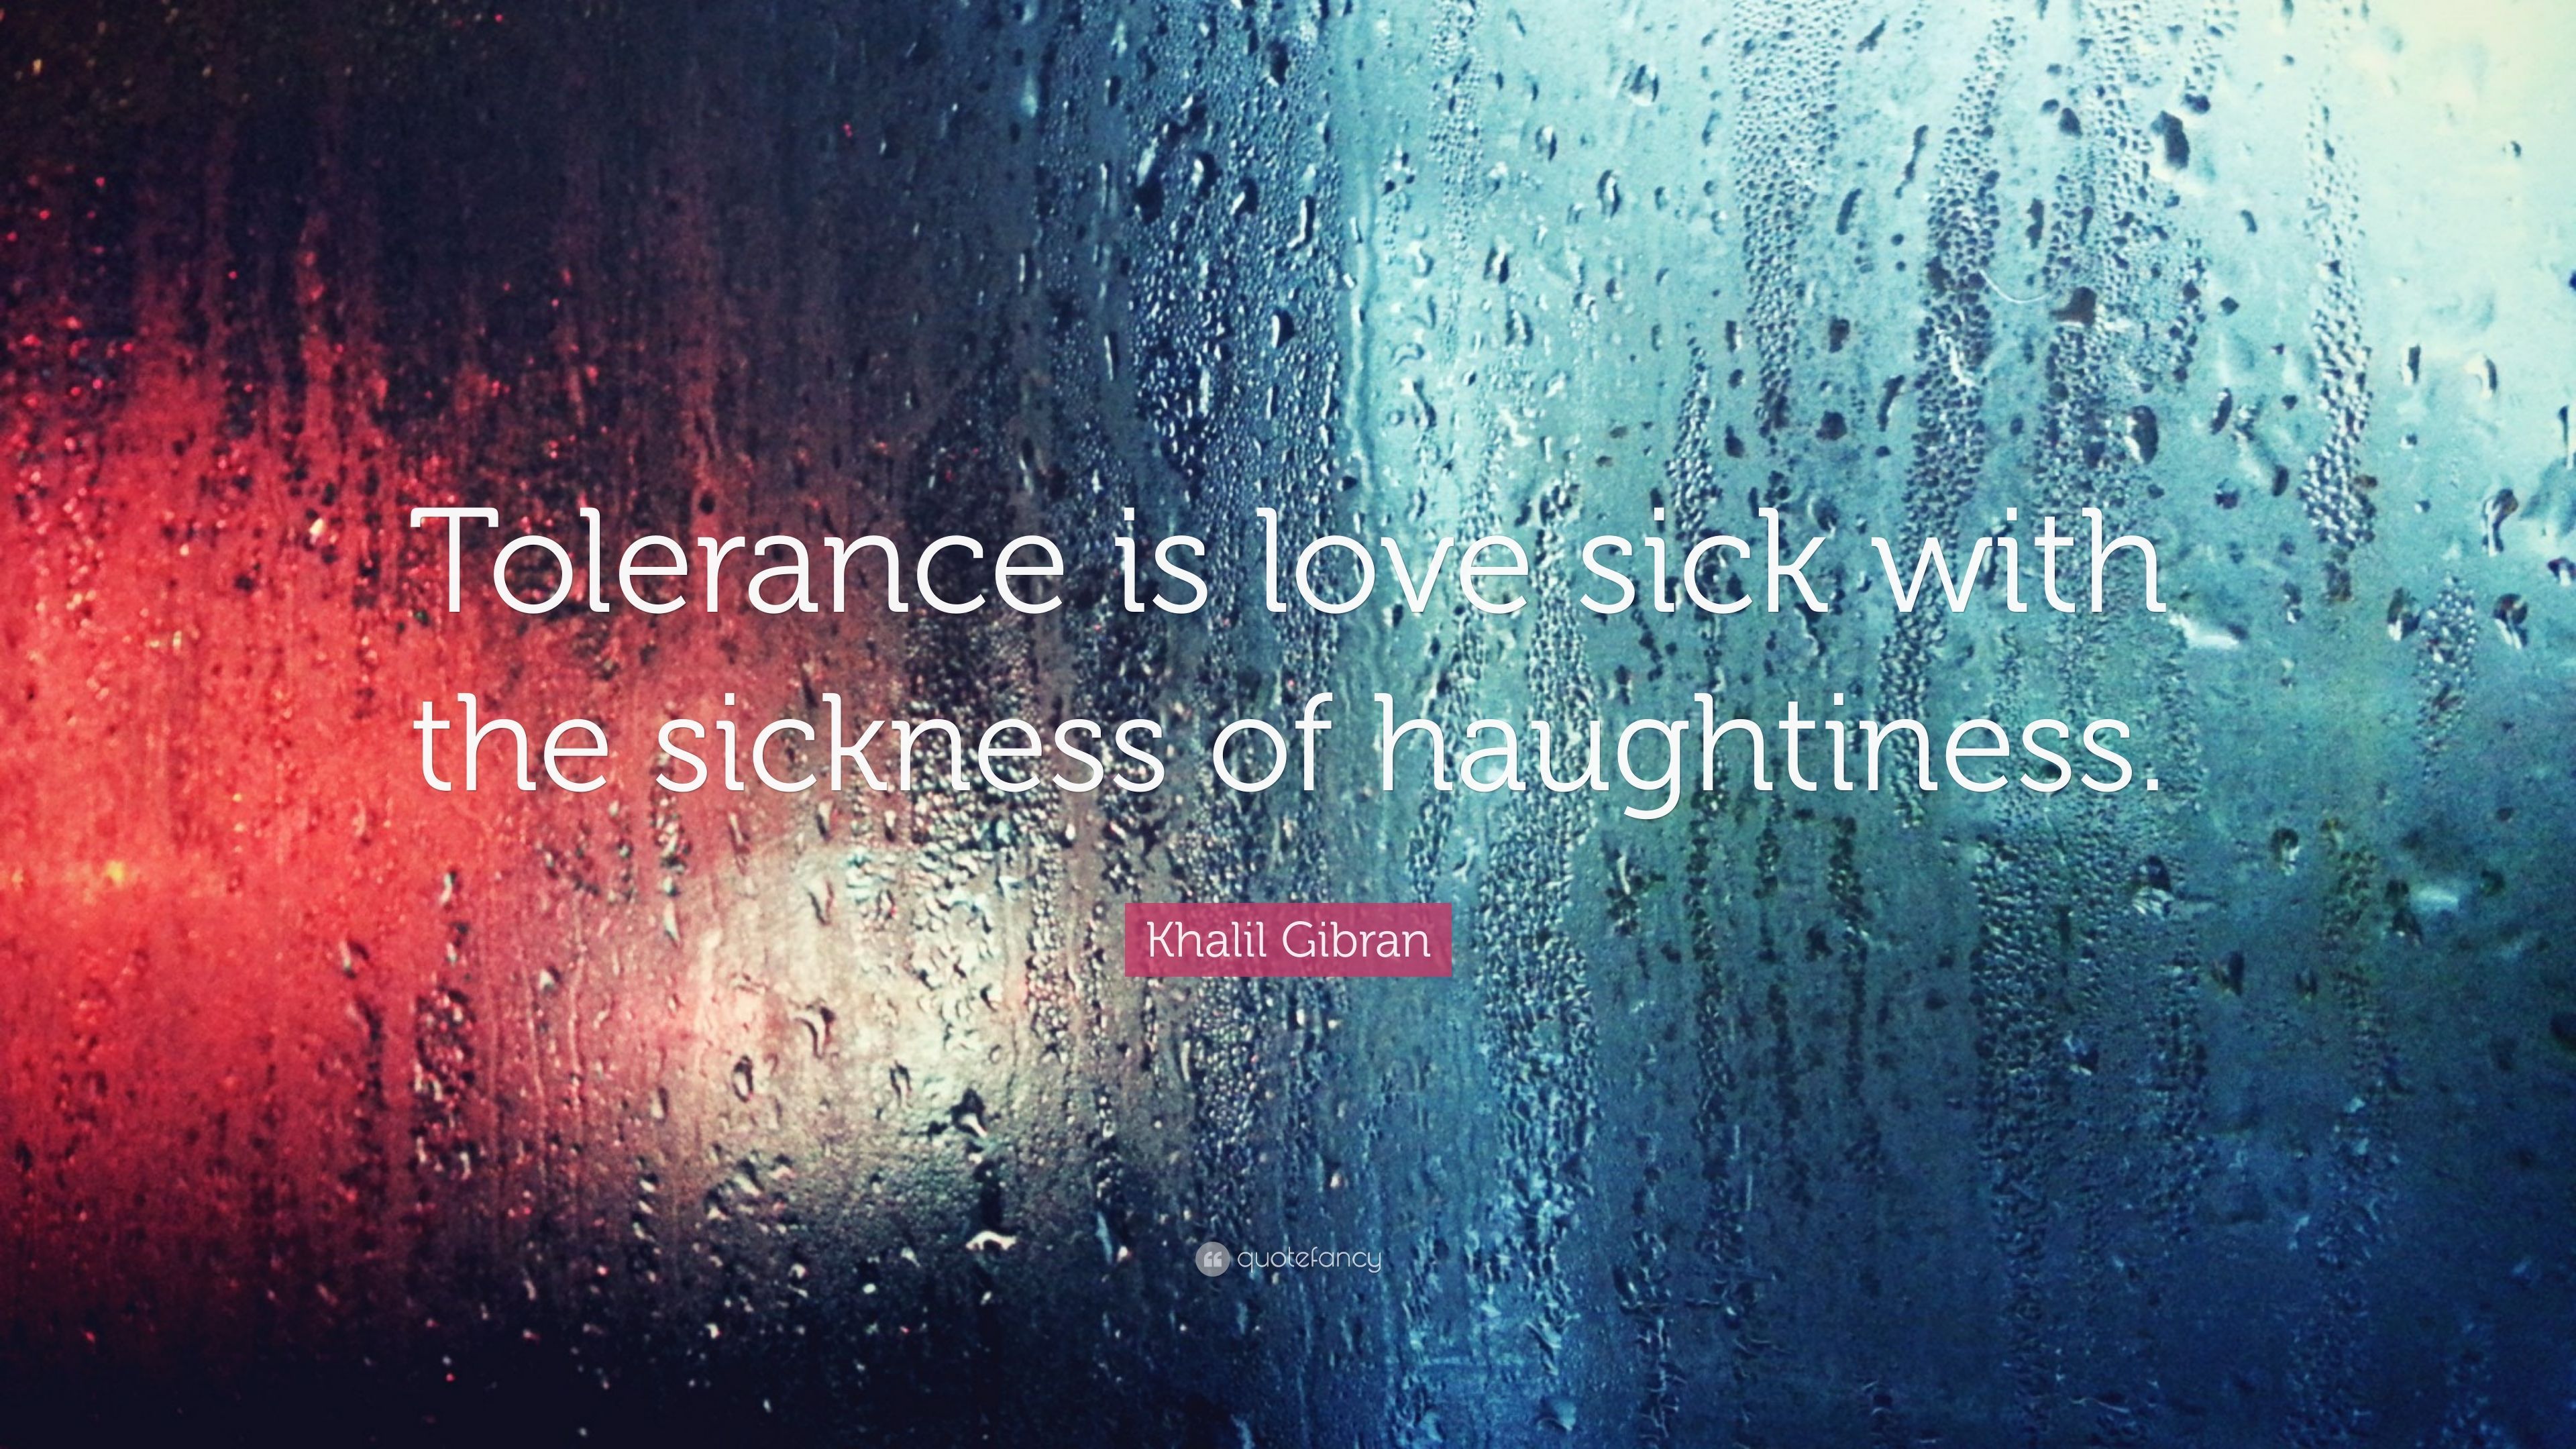 Khalil Gibran Quote: “Tolerance is love sick with the sickness of haughtiness.” (7 wallpaper)